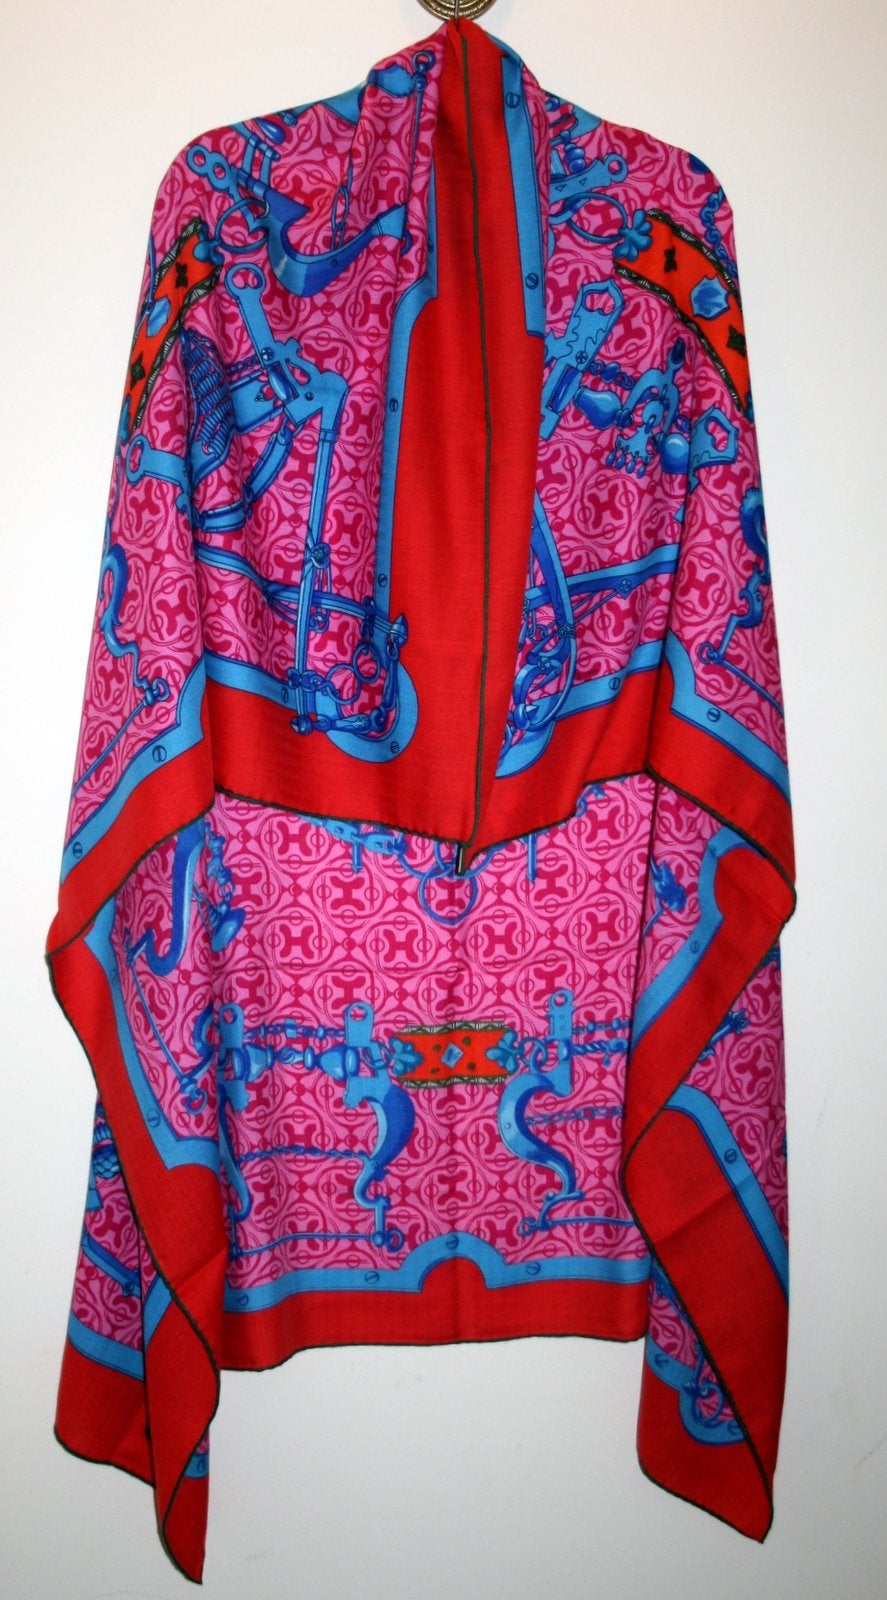 Never worn with the tag still attached, this Hermès Pink Mors et Gourmettes Remix Cashmere and Silk GM Shawl is a beautiful collectible.  The Henri d’Origney design features a variety of blue bits and chains on a vivid pink and red background of